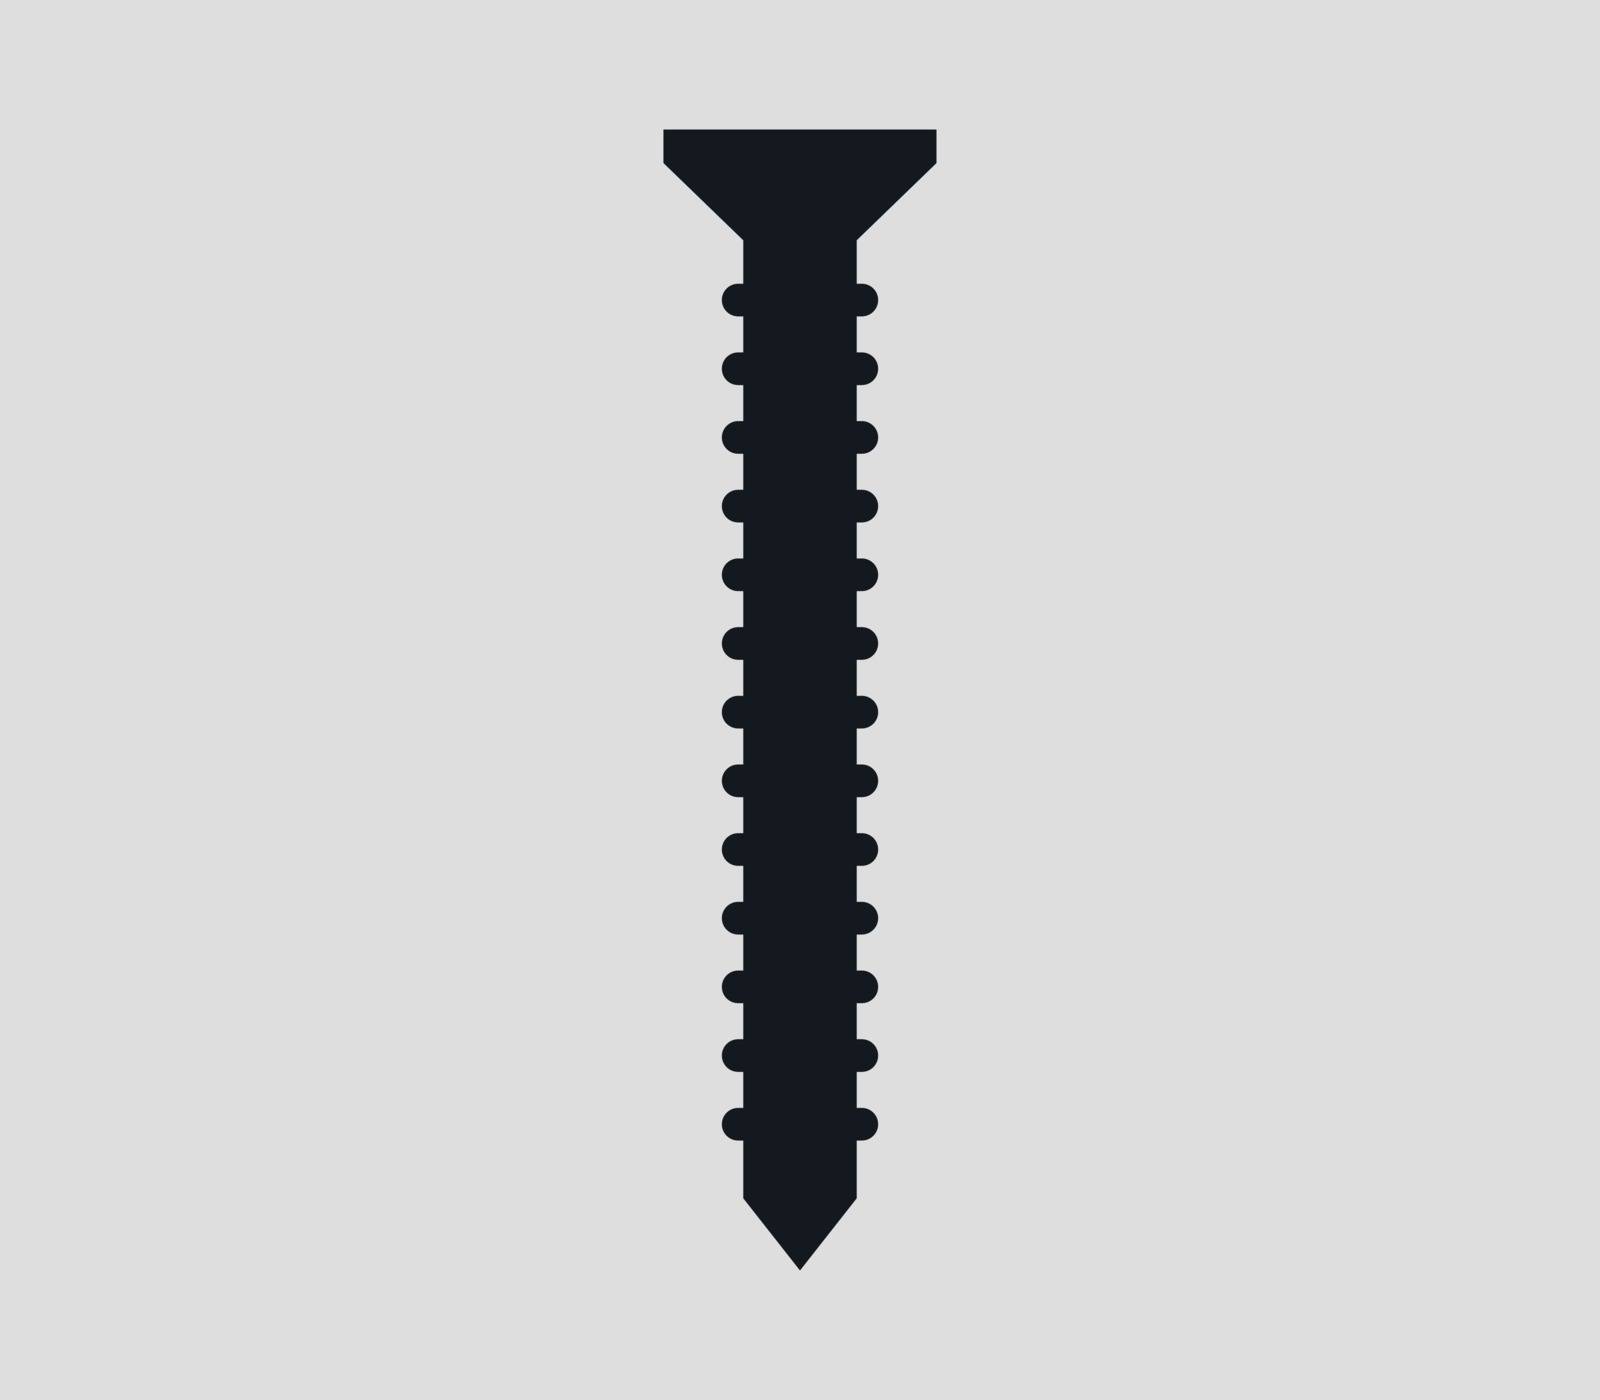 screw icon by Mark1987